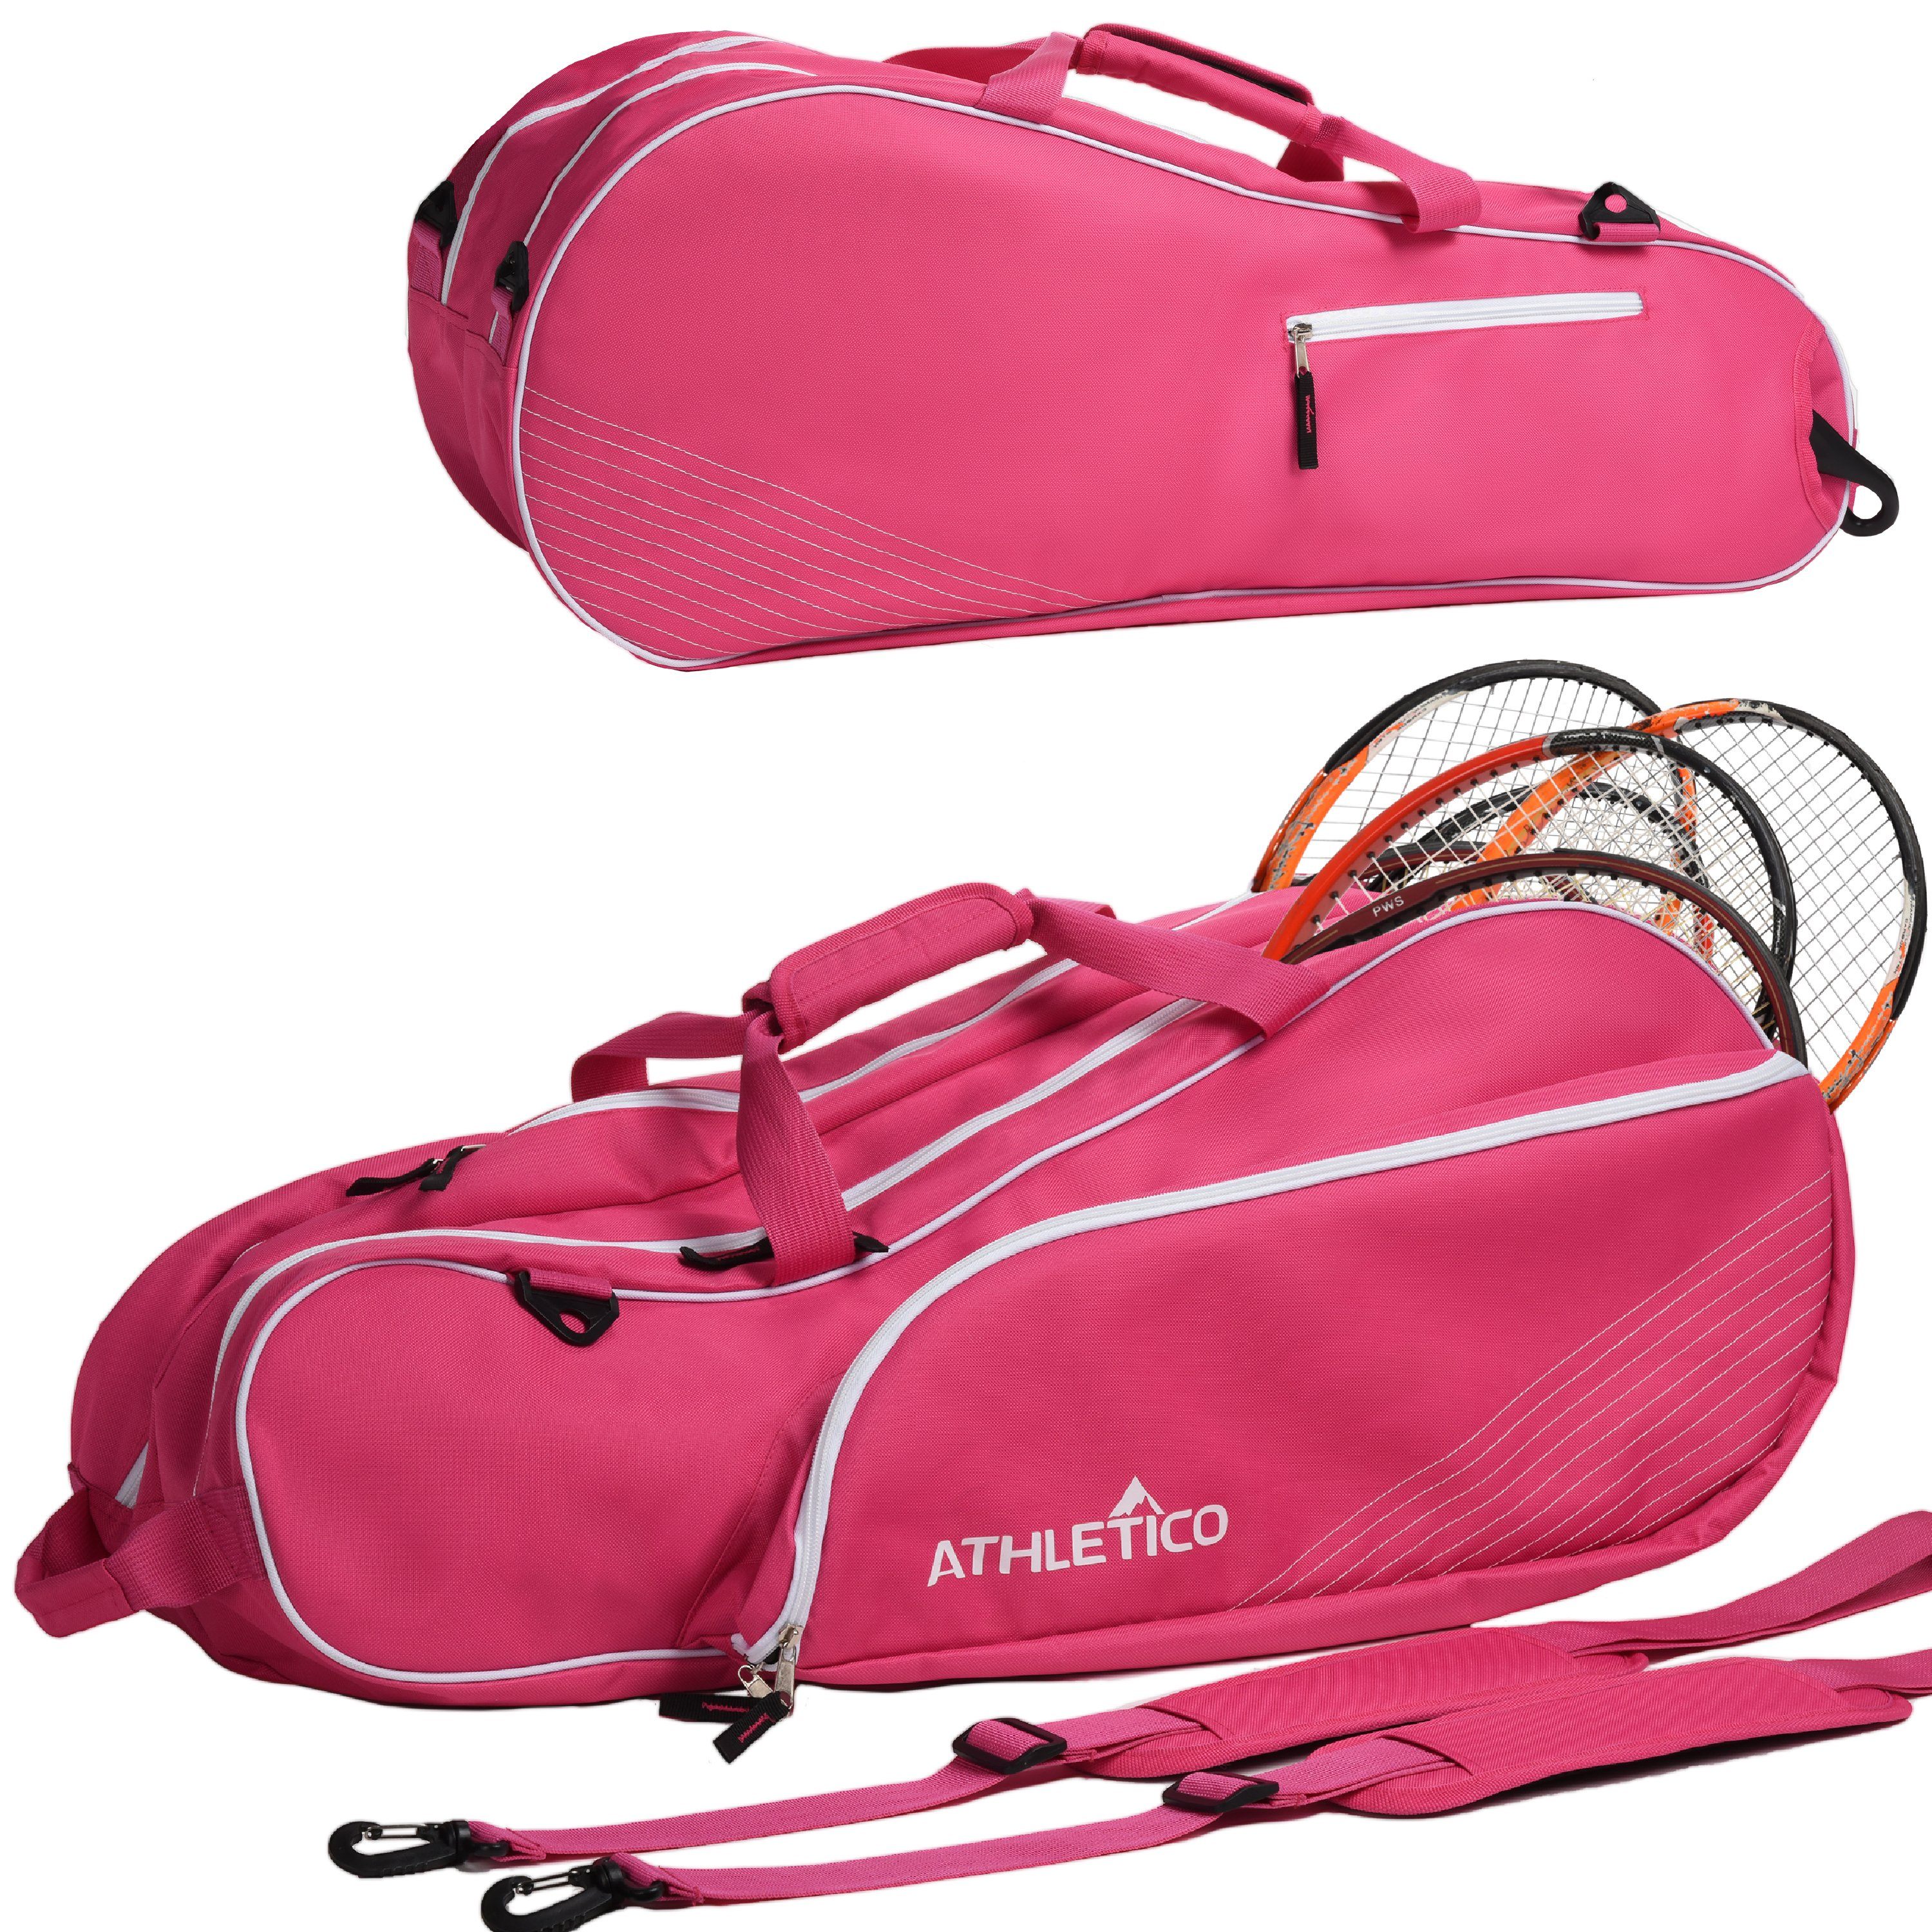 Athletico 3 Racquet Tennis Bag, Padded to Protect Rackets & Lightweight, Professional or Beginner Tennis Players